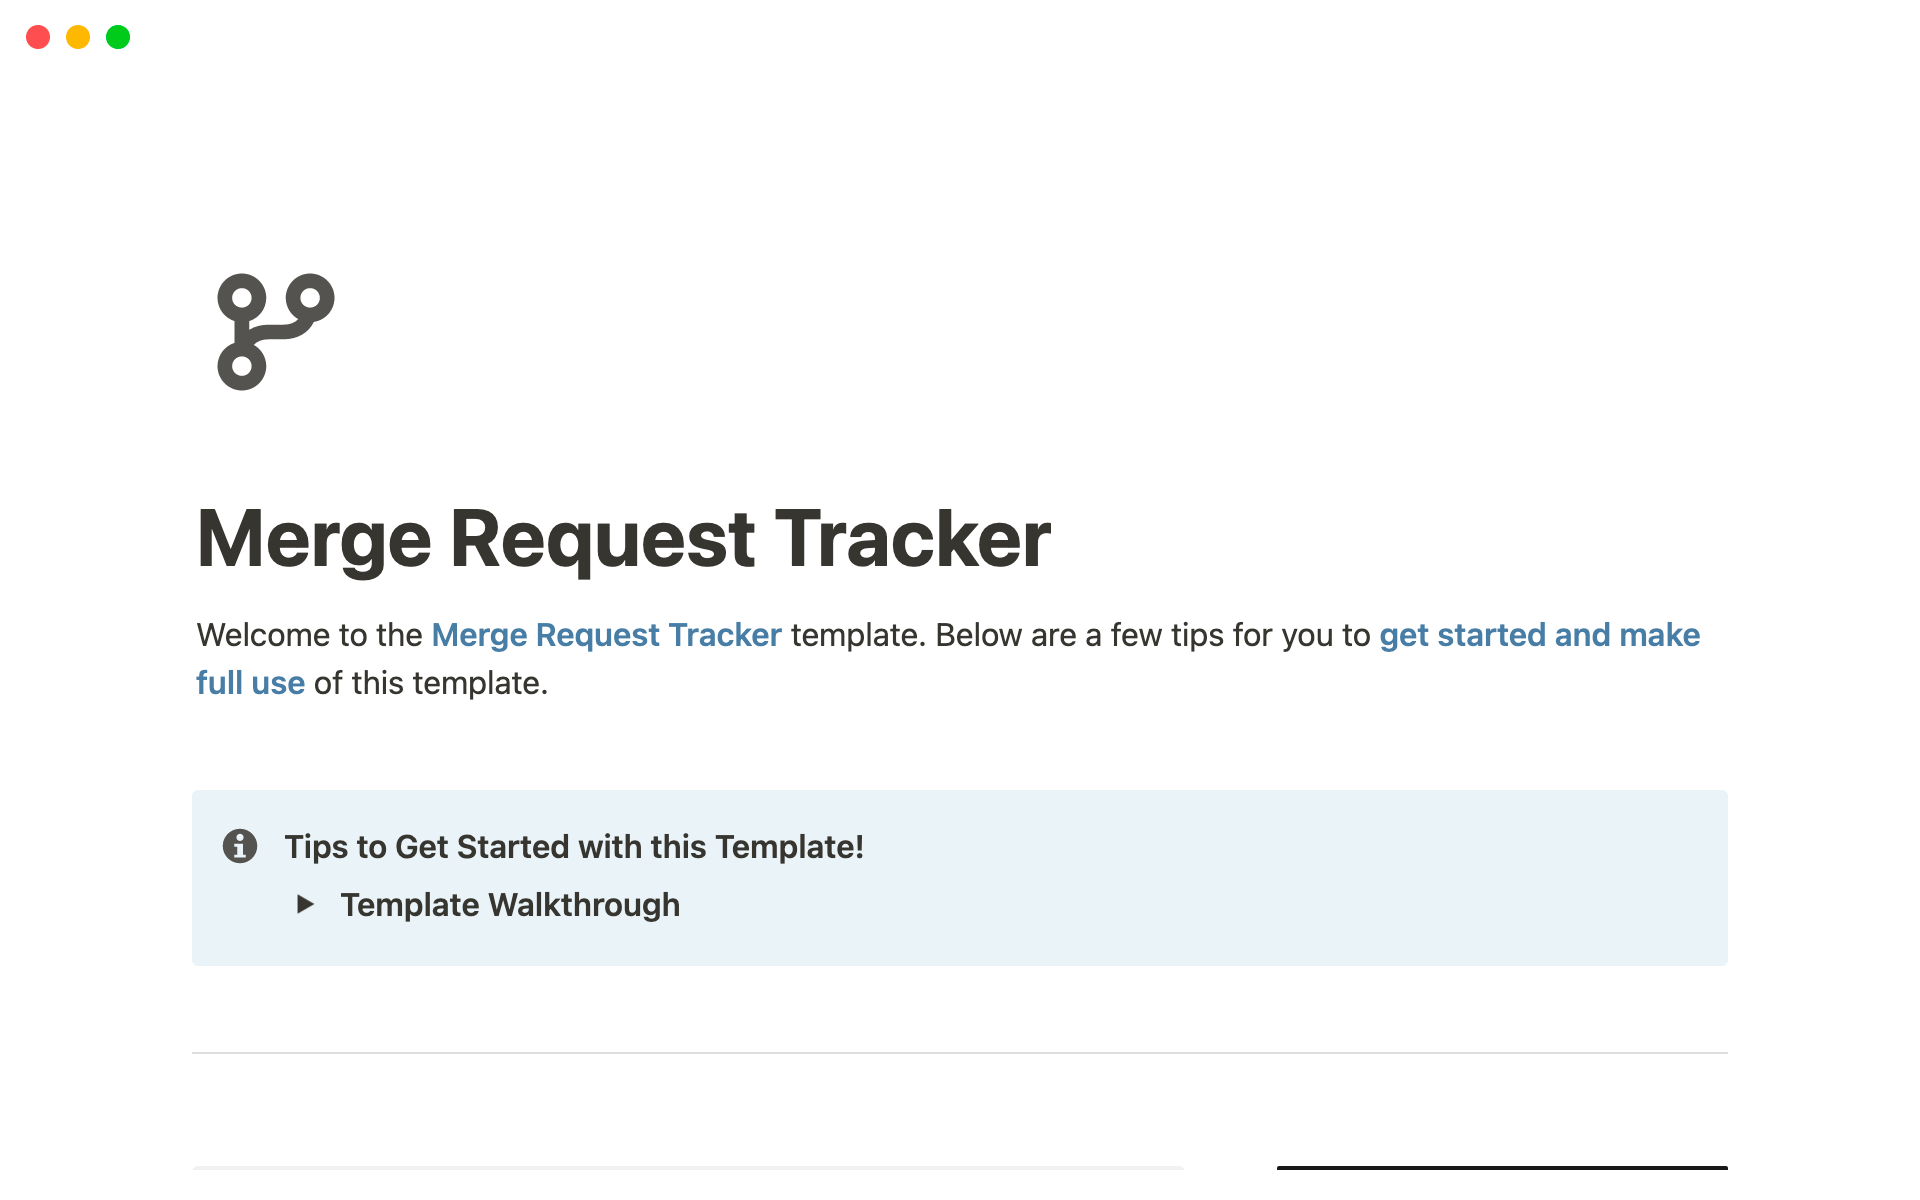 Track and Manage all your Team's Merge Requests in a single place.